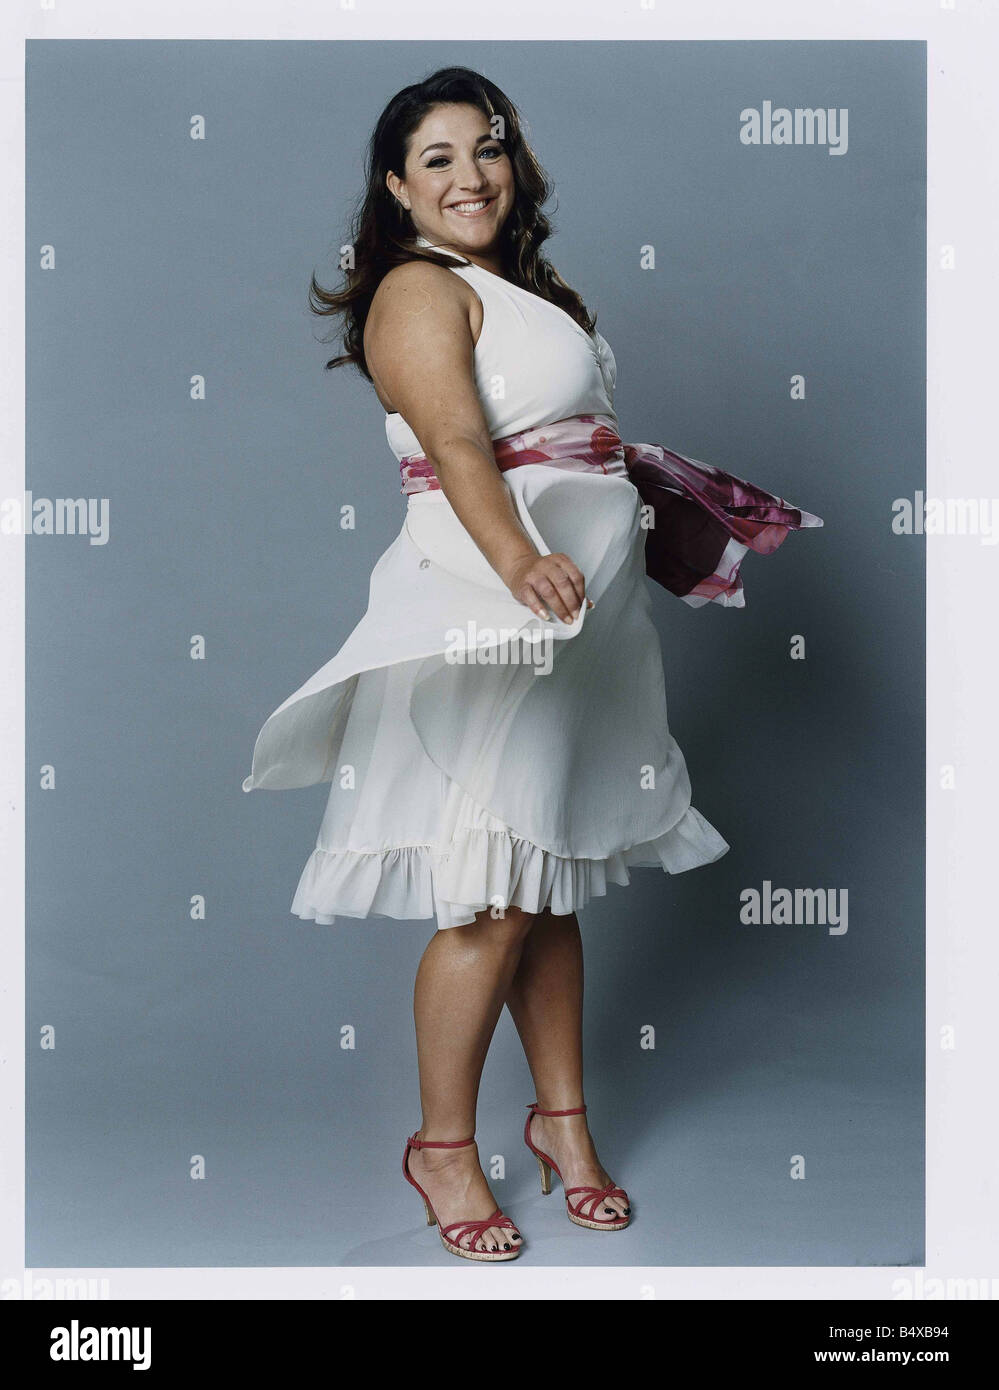 Television preseneter and child psychologoist Jo Frost more commonly known  as Supernanny poses during a photoshoot July 2006 Stock Photo - Alamy